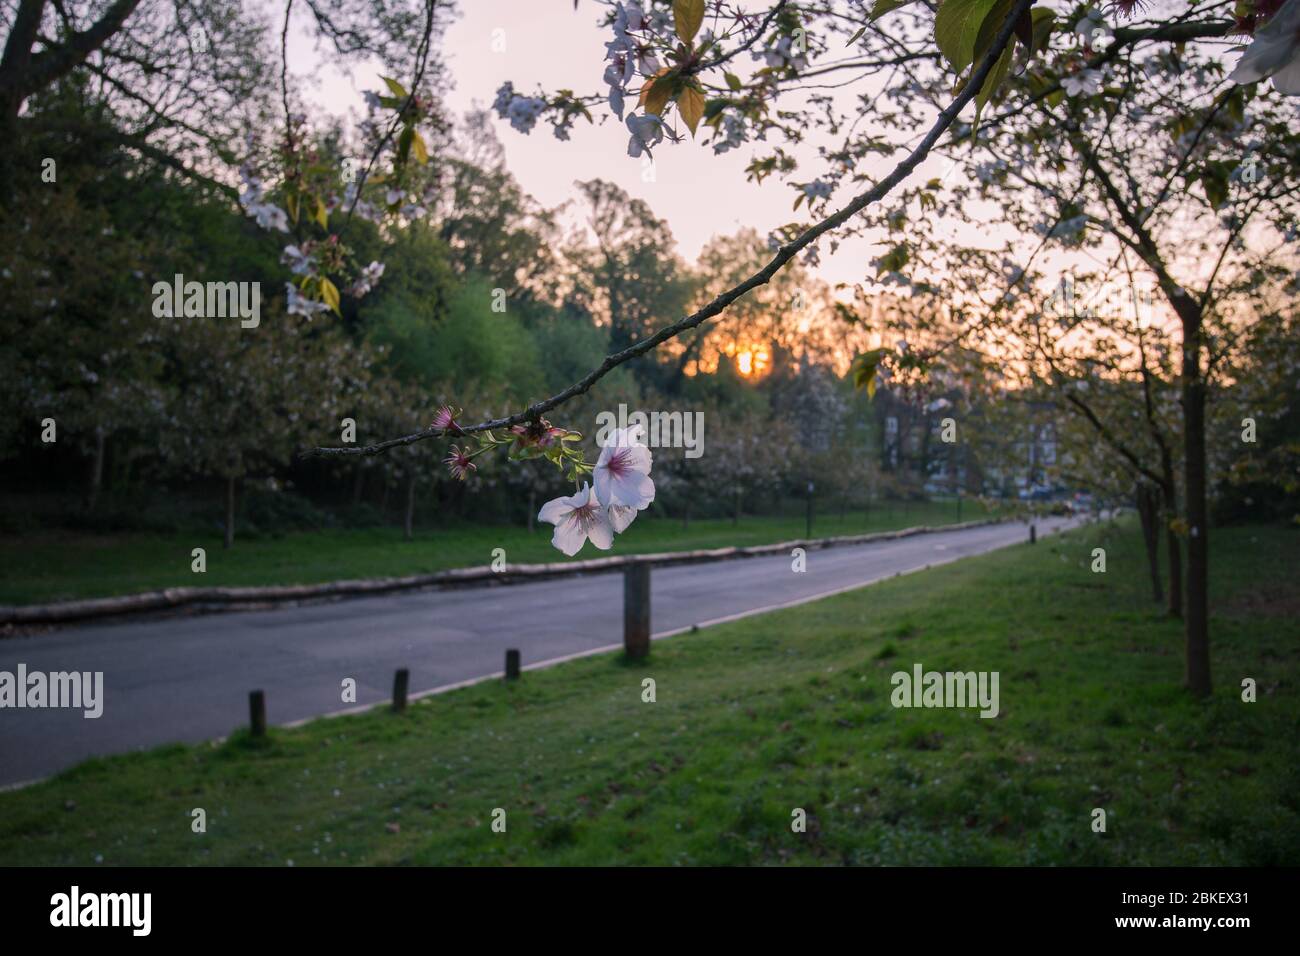 Royal Tunbridge Wells Common, taken at sunrise on a Spring morning in April 2020 deserted streets due to lockdown from Coronavirus Covid 19 Stock Photo